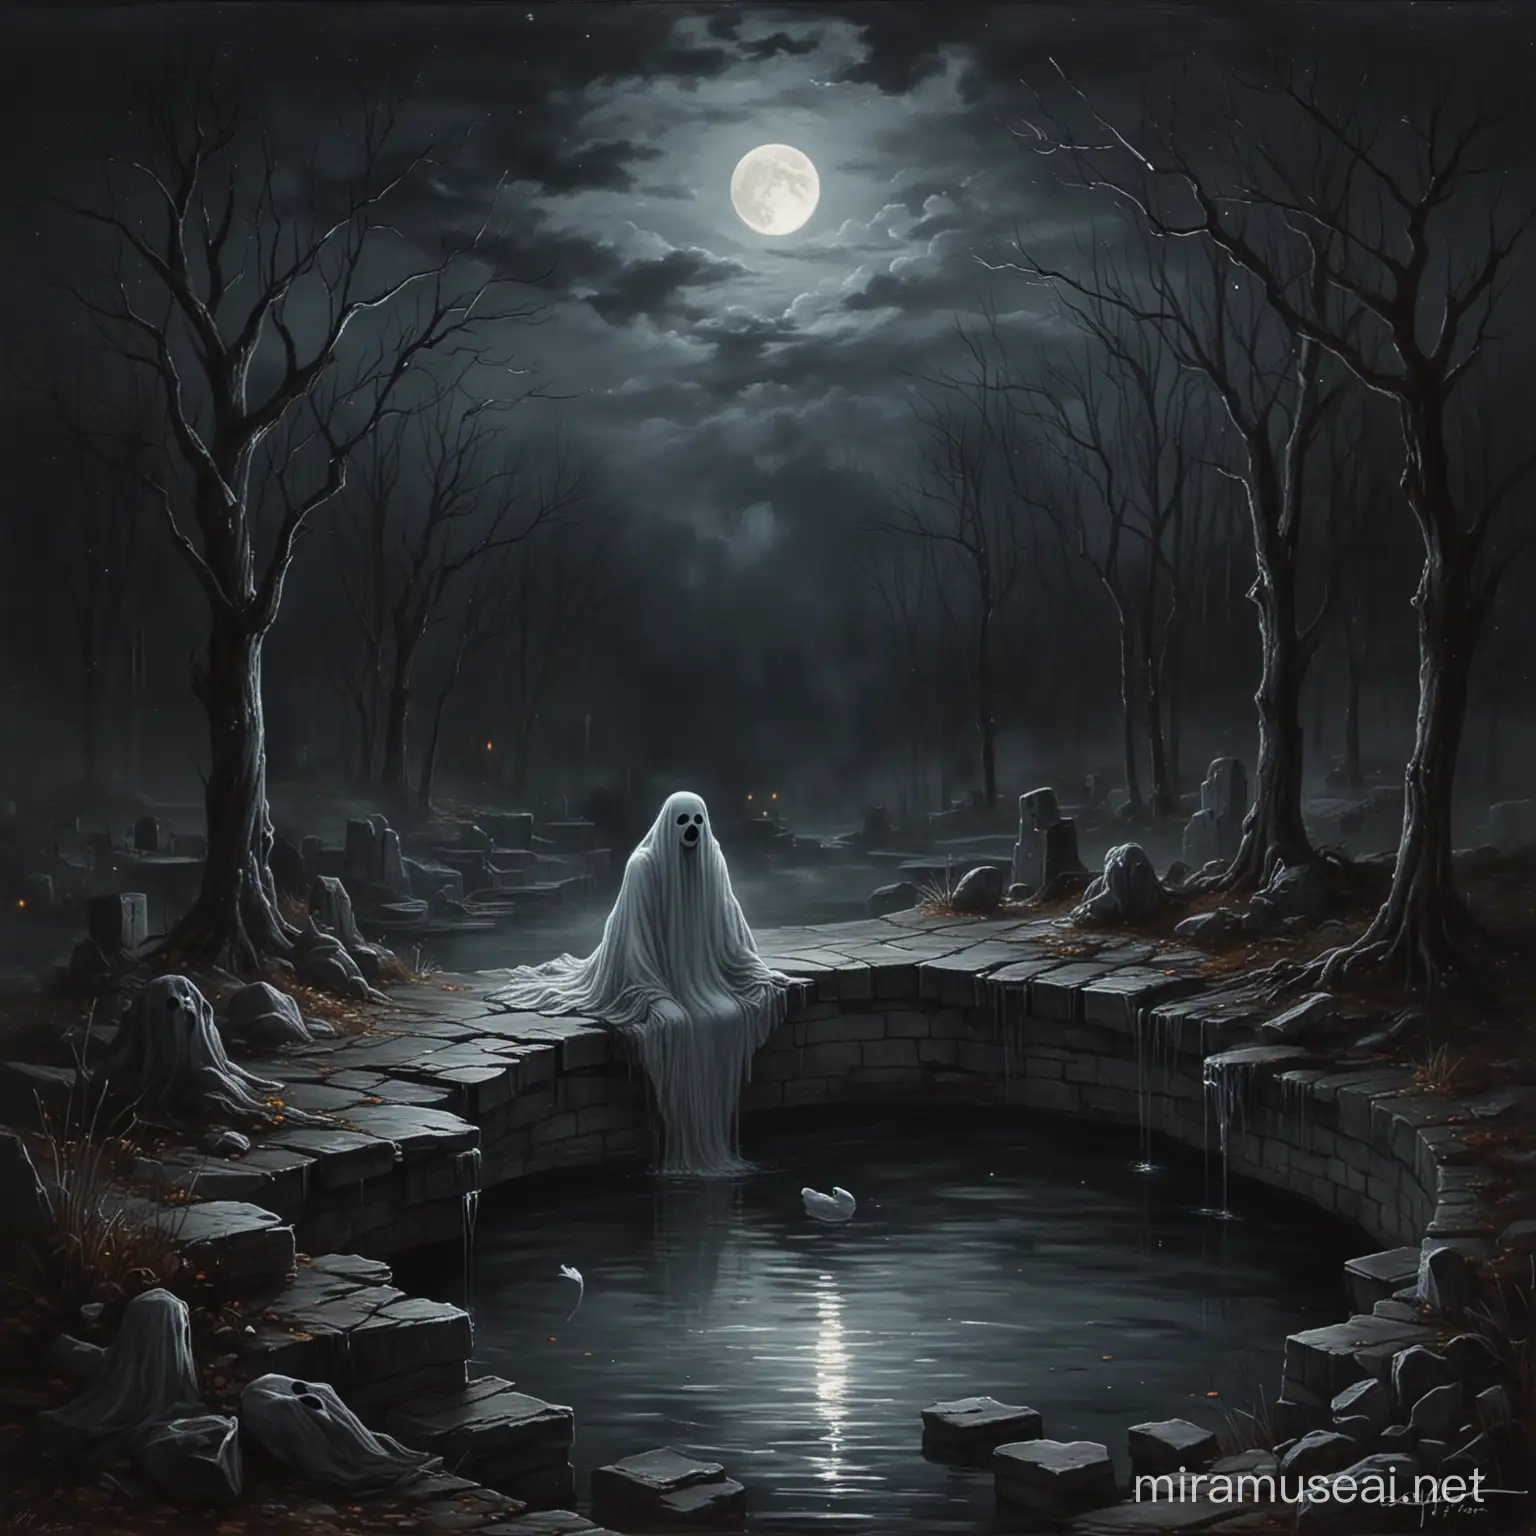 Mysterious Nighttime Encounter Ghostly Figure by Moonlit Fountain